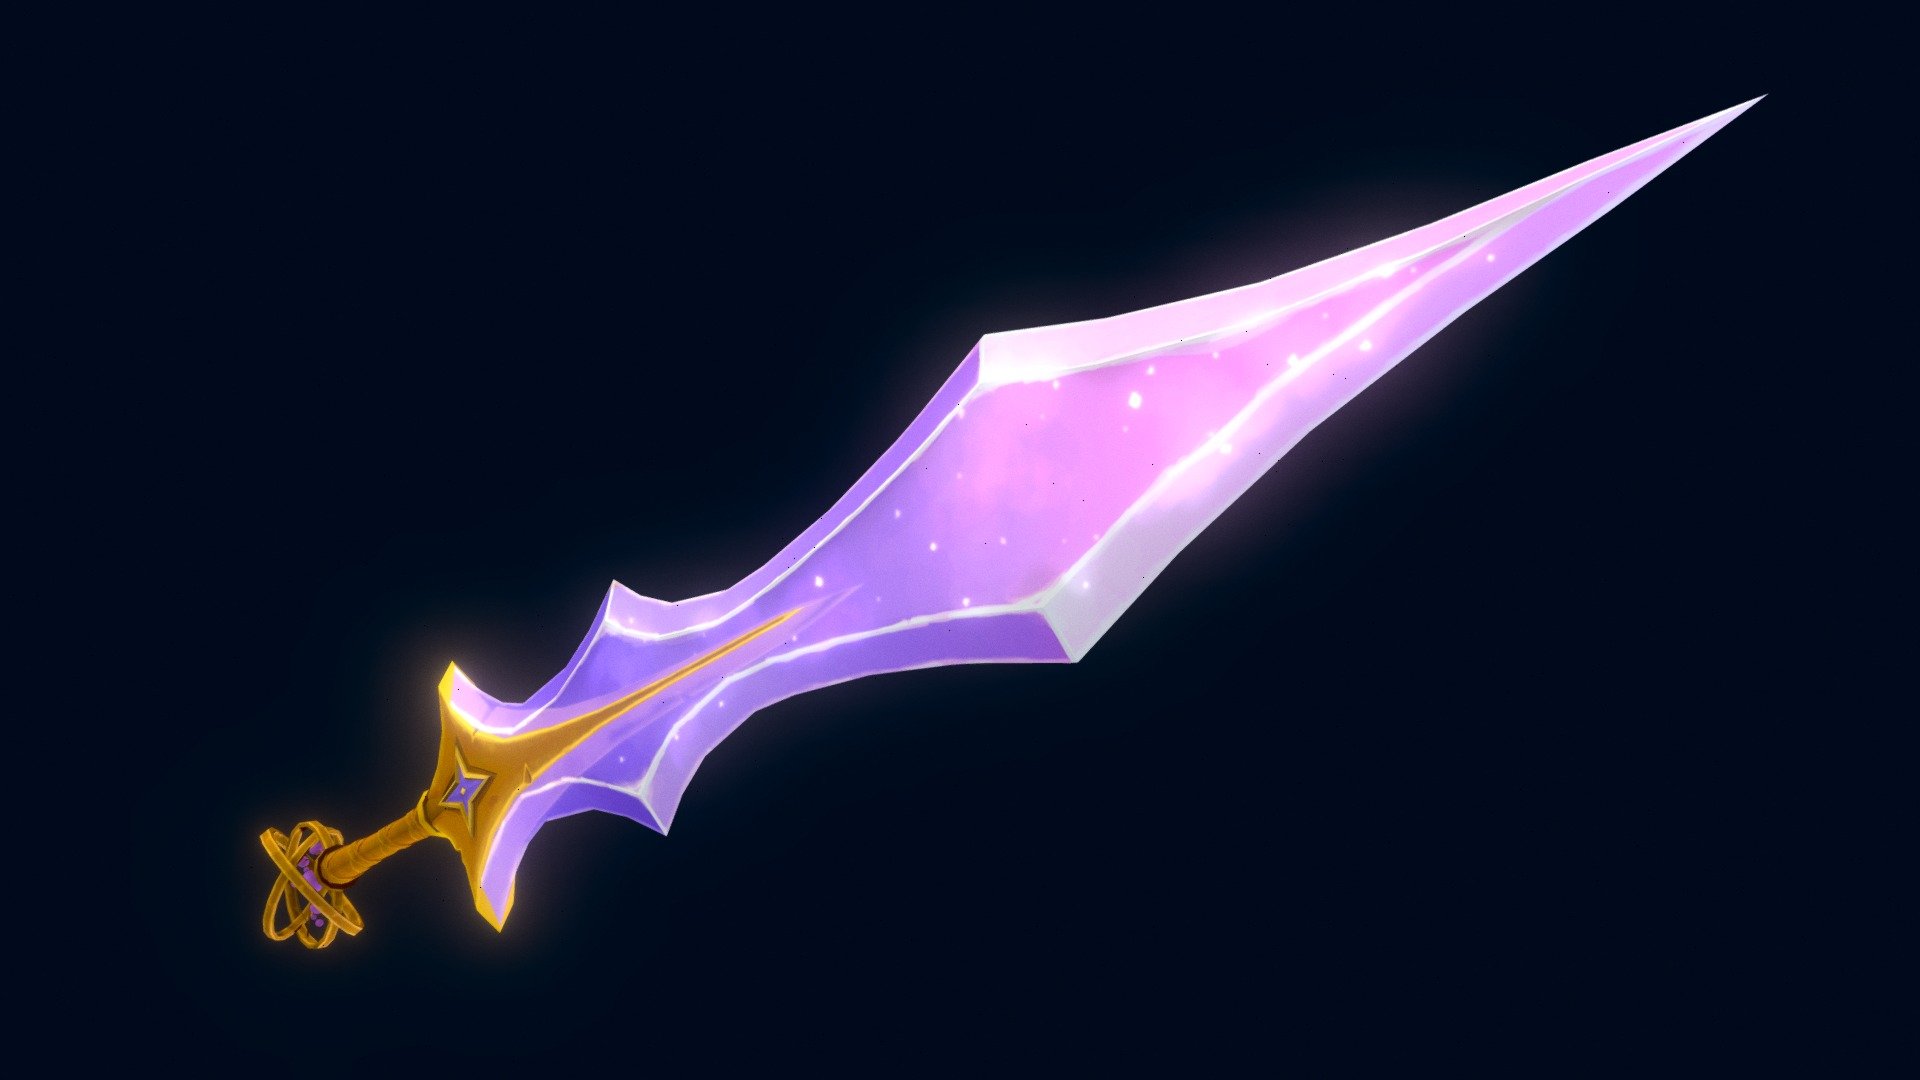 A galaxy themed handpainted sword made in 3dsMax as a class project! Check out the other works: #bib3d2023 - Galaxy Sword - Download Free 3D model by JustFitz 3d model